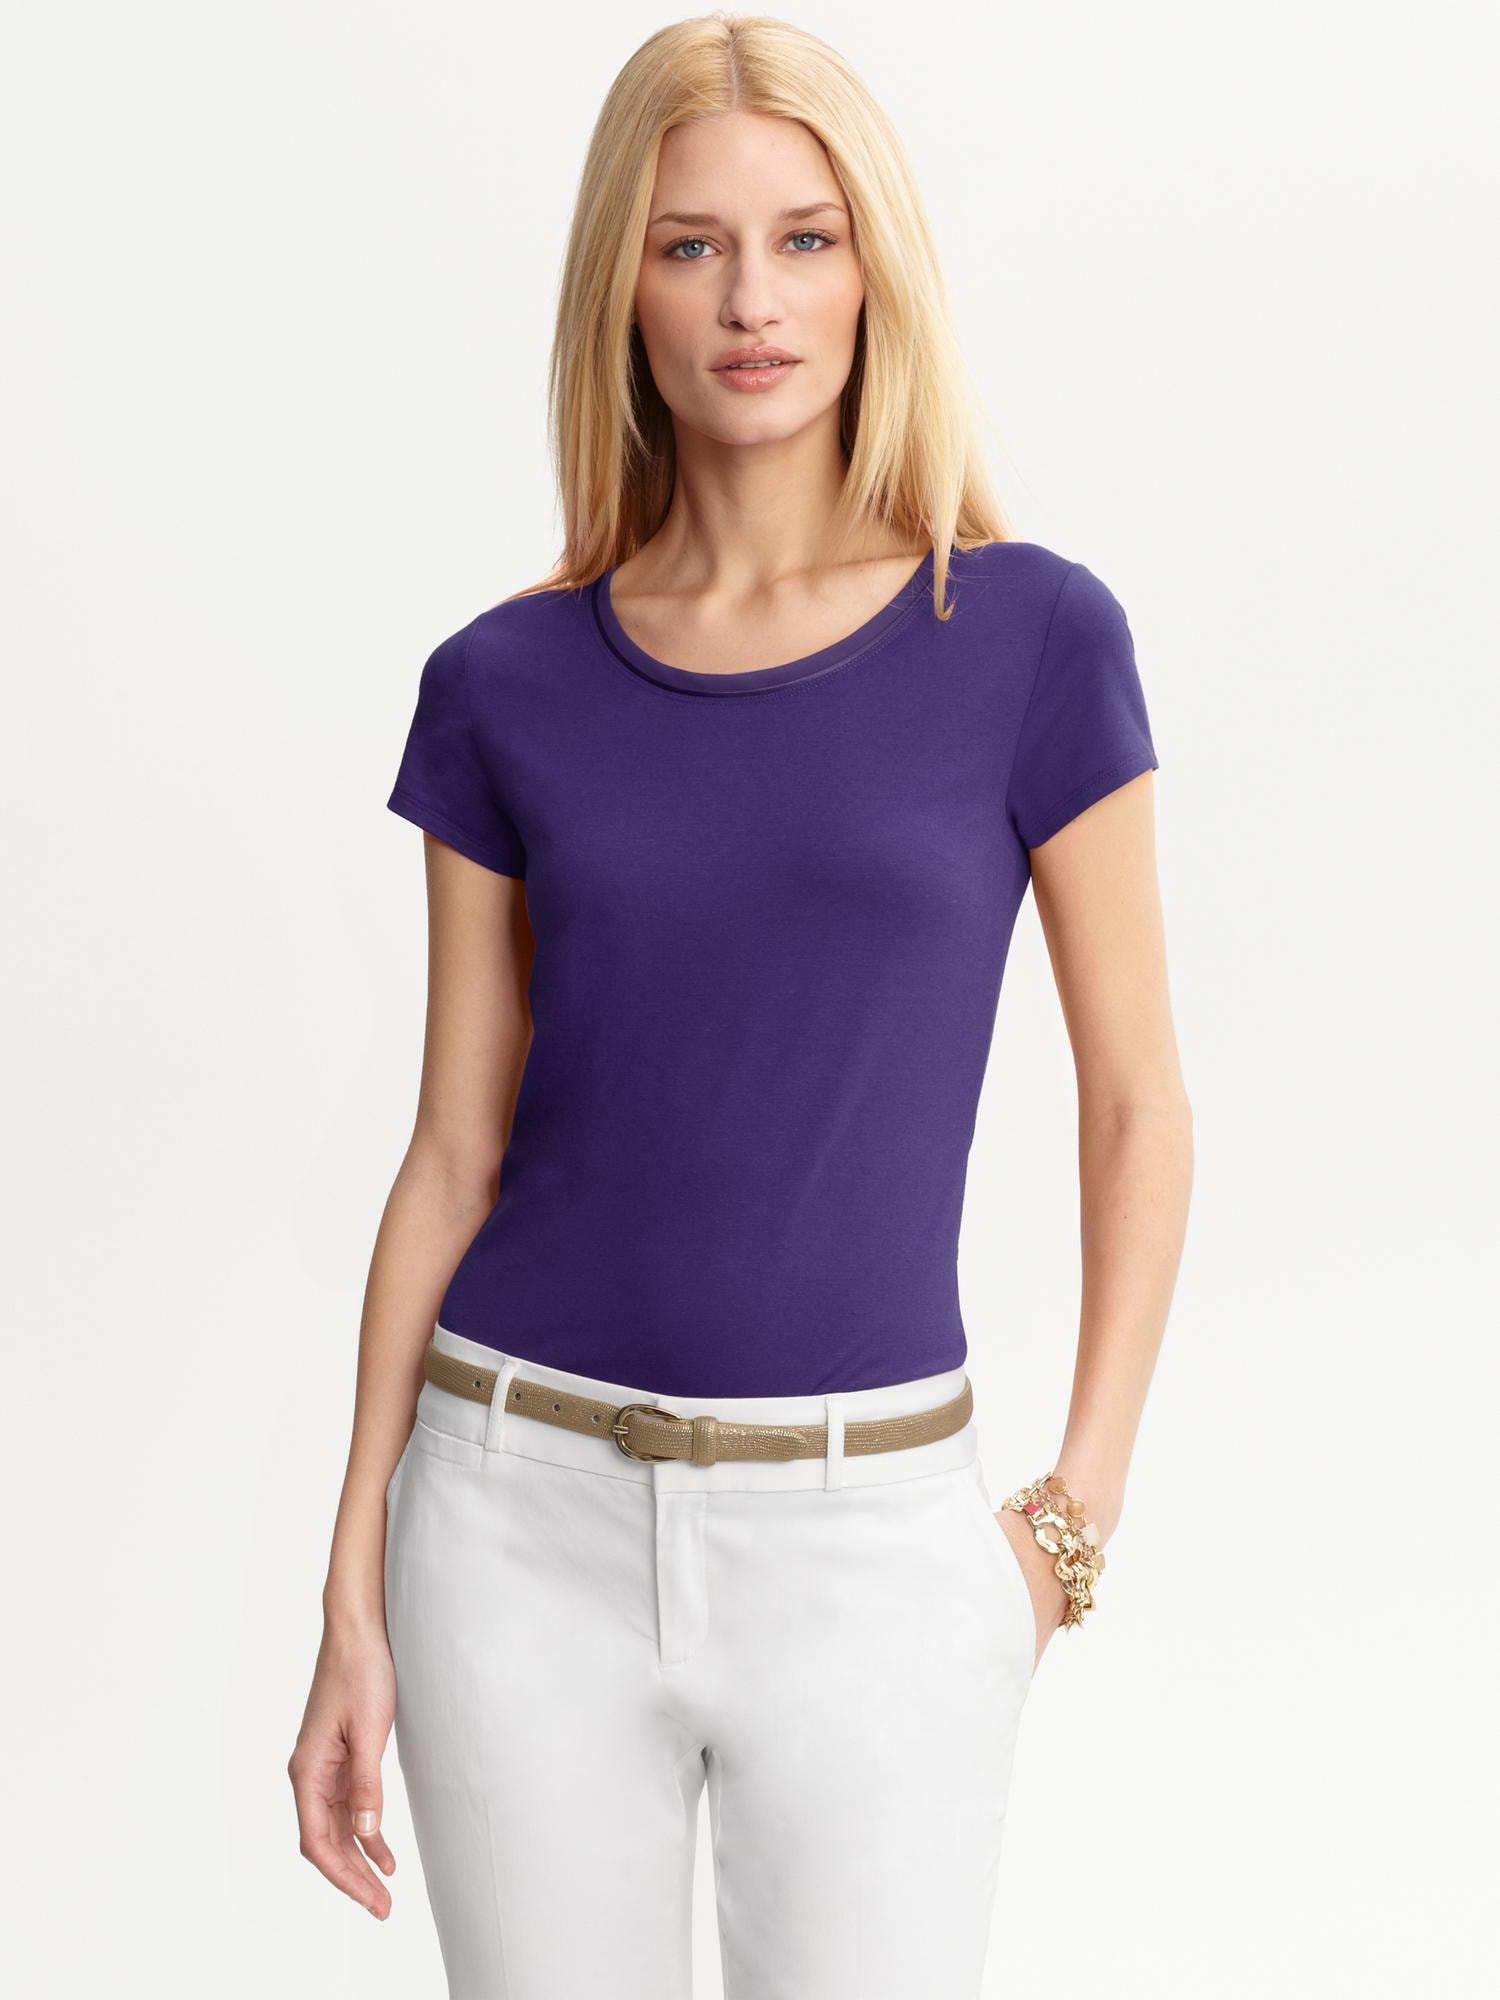 Luxe-touch piped neckline tee